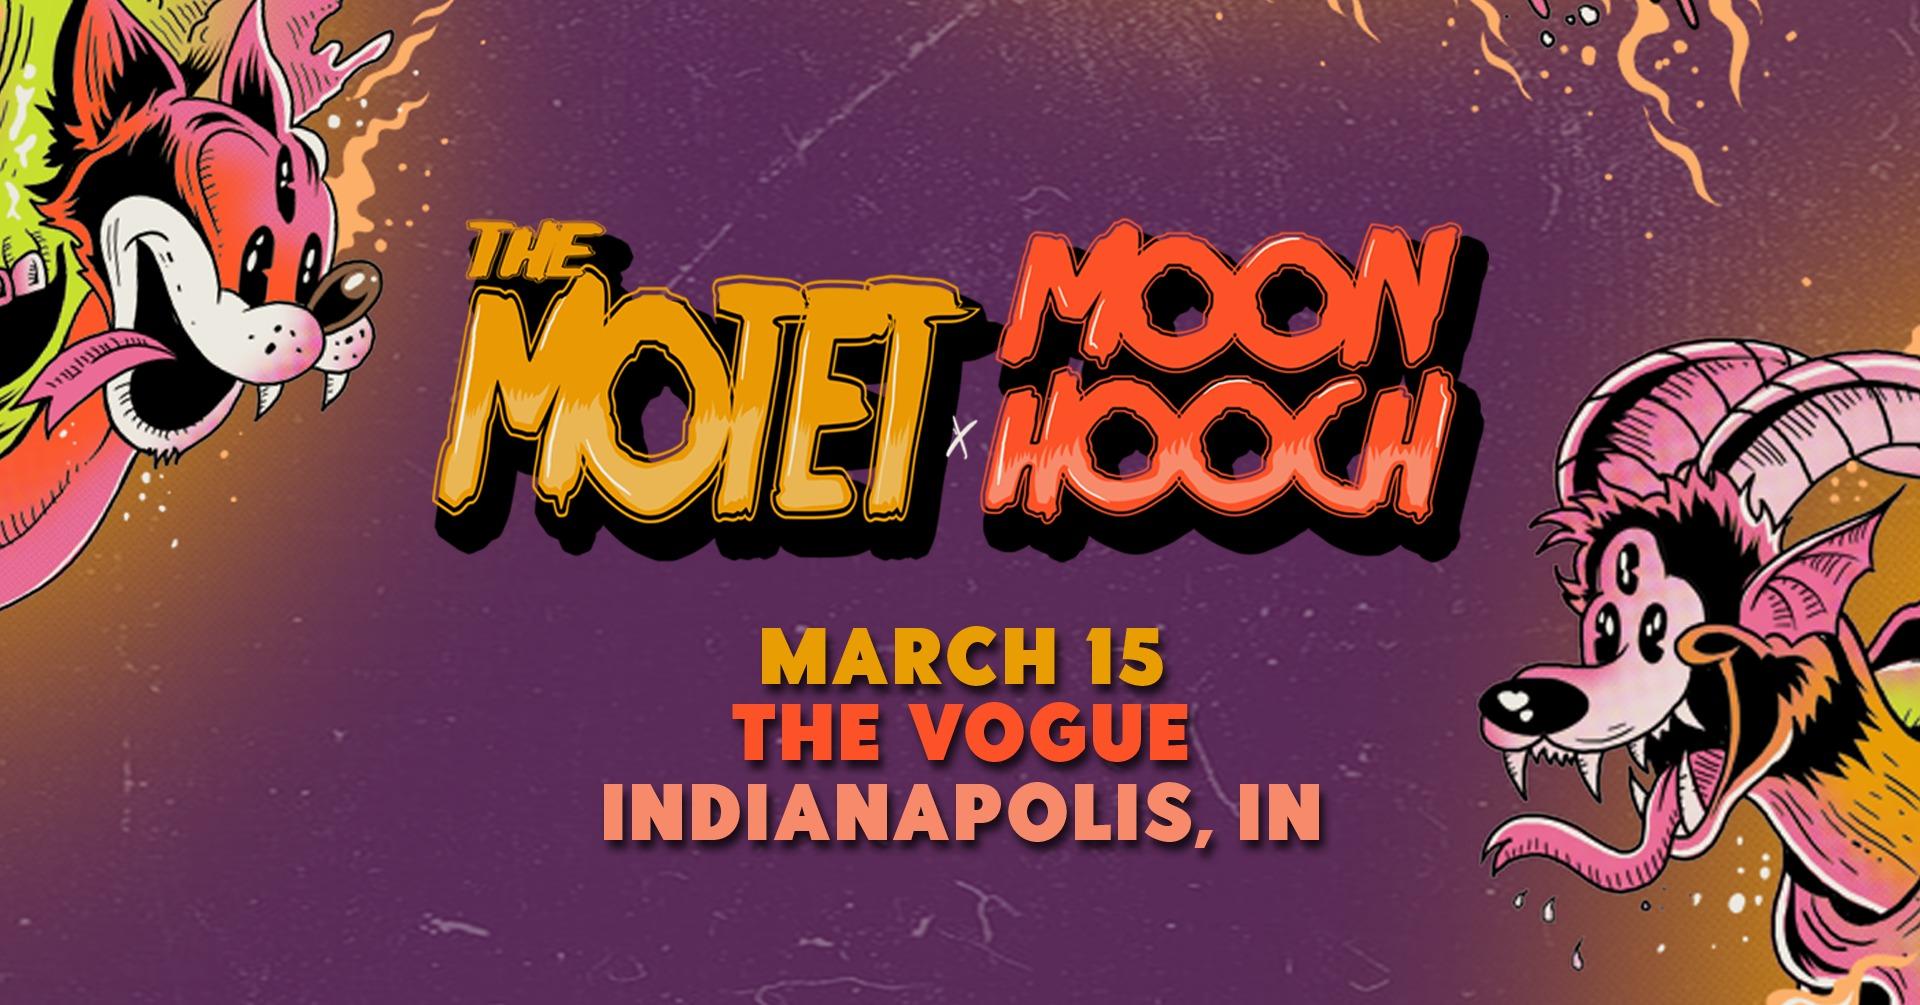 The Motet + Moon Hooch at The Vogue Theatre